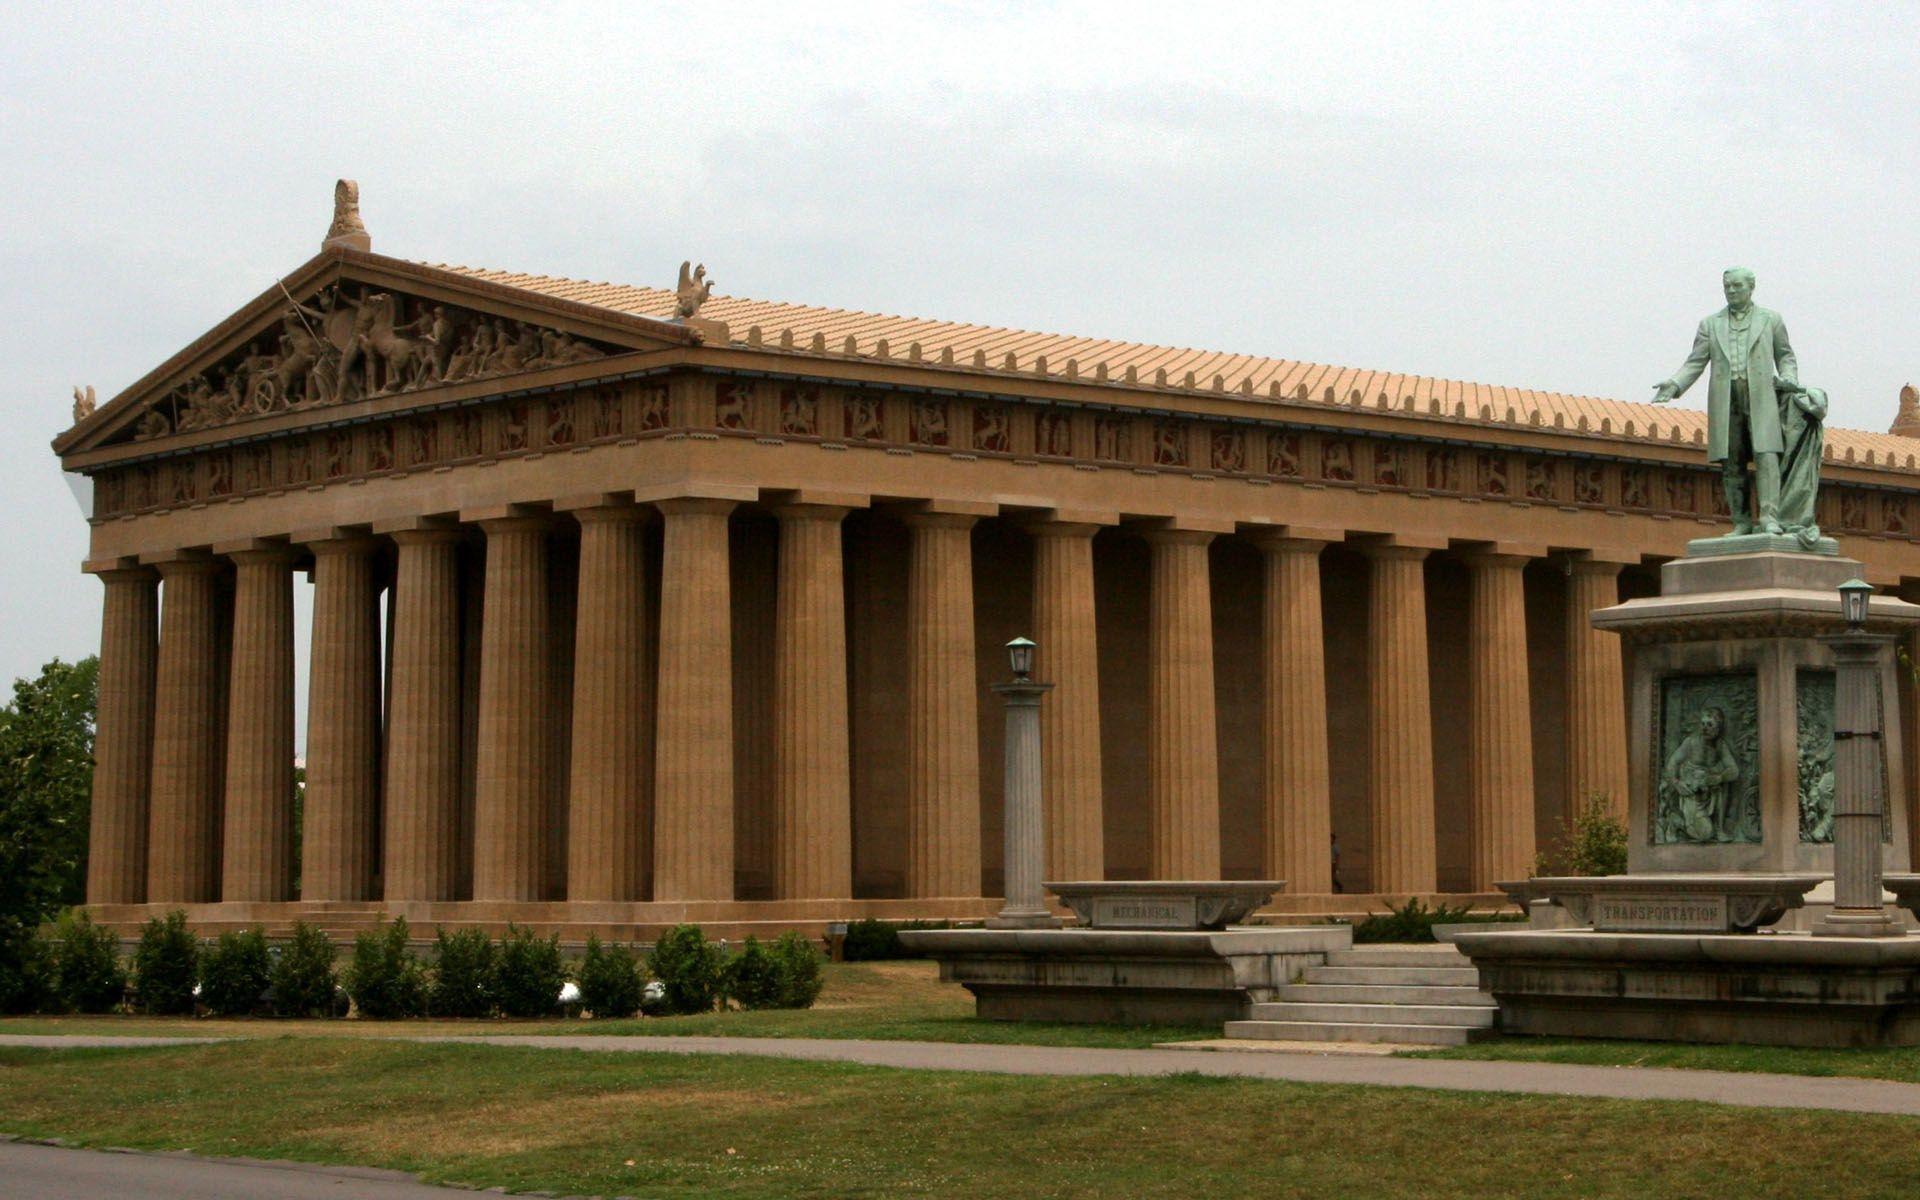 Nashville Parthenon From South Travel photo and wallpaper